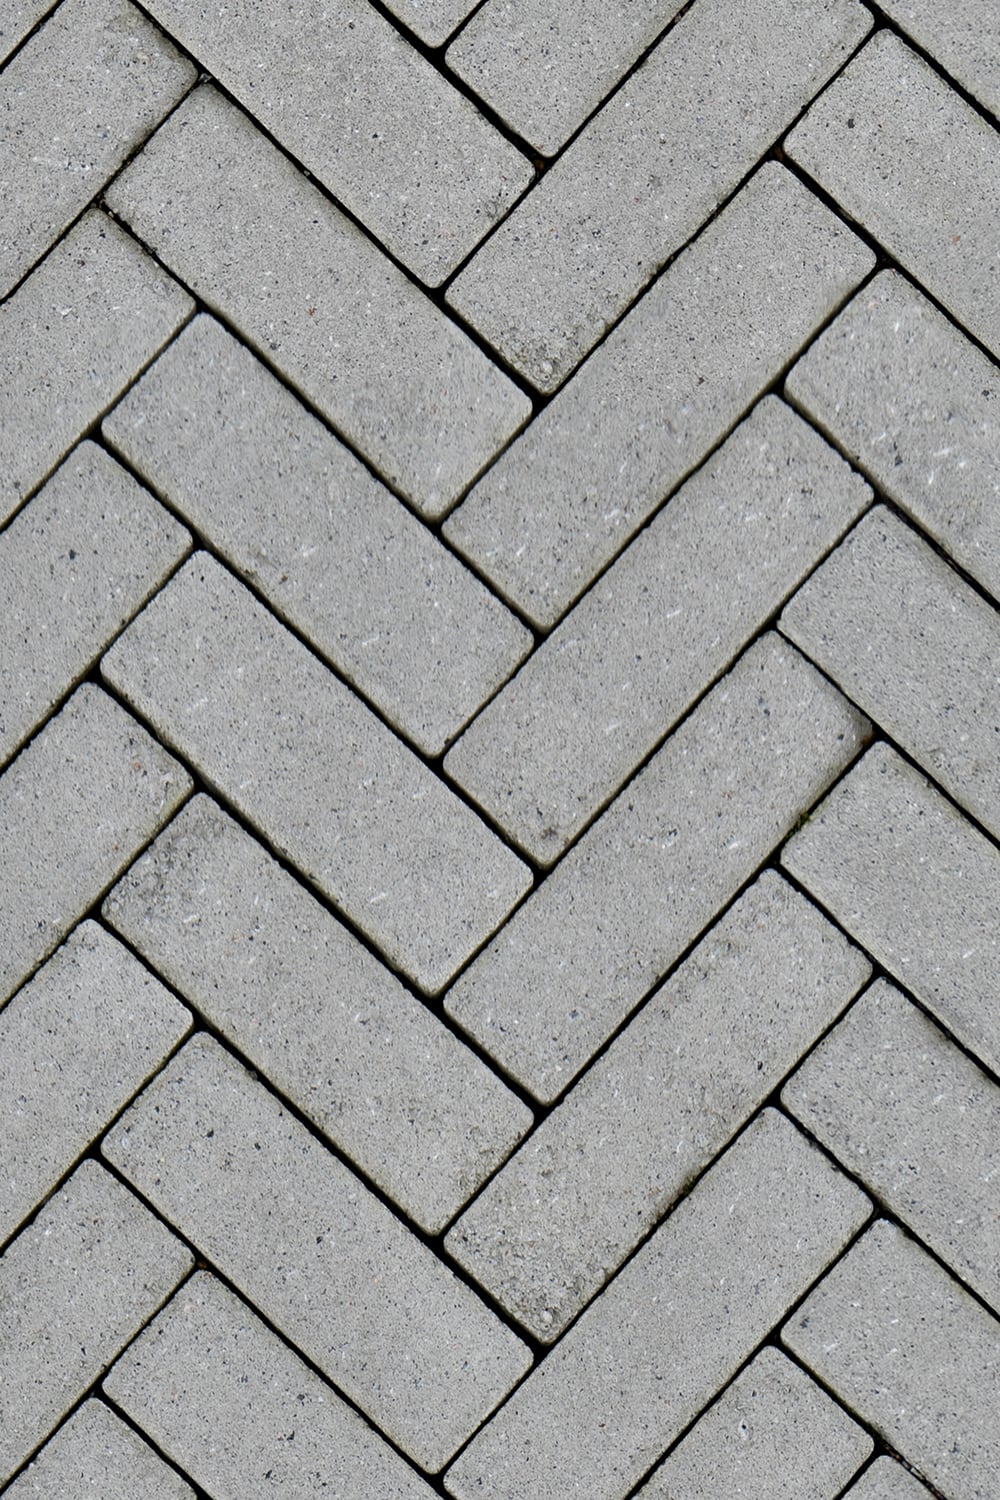 Concrete brick tiled floor with zigzag pattern close up seamless texture